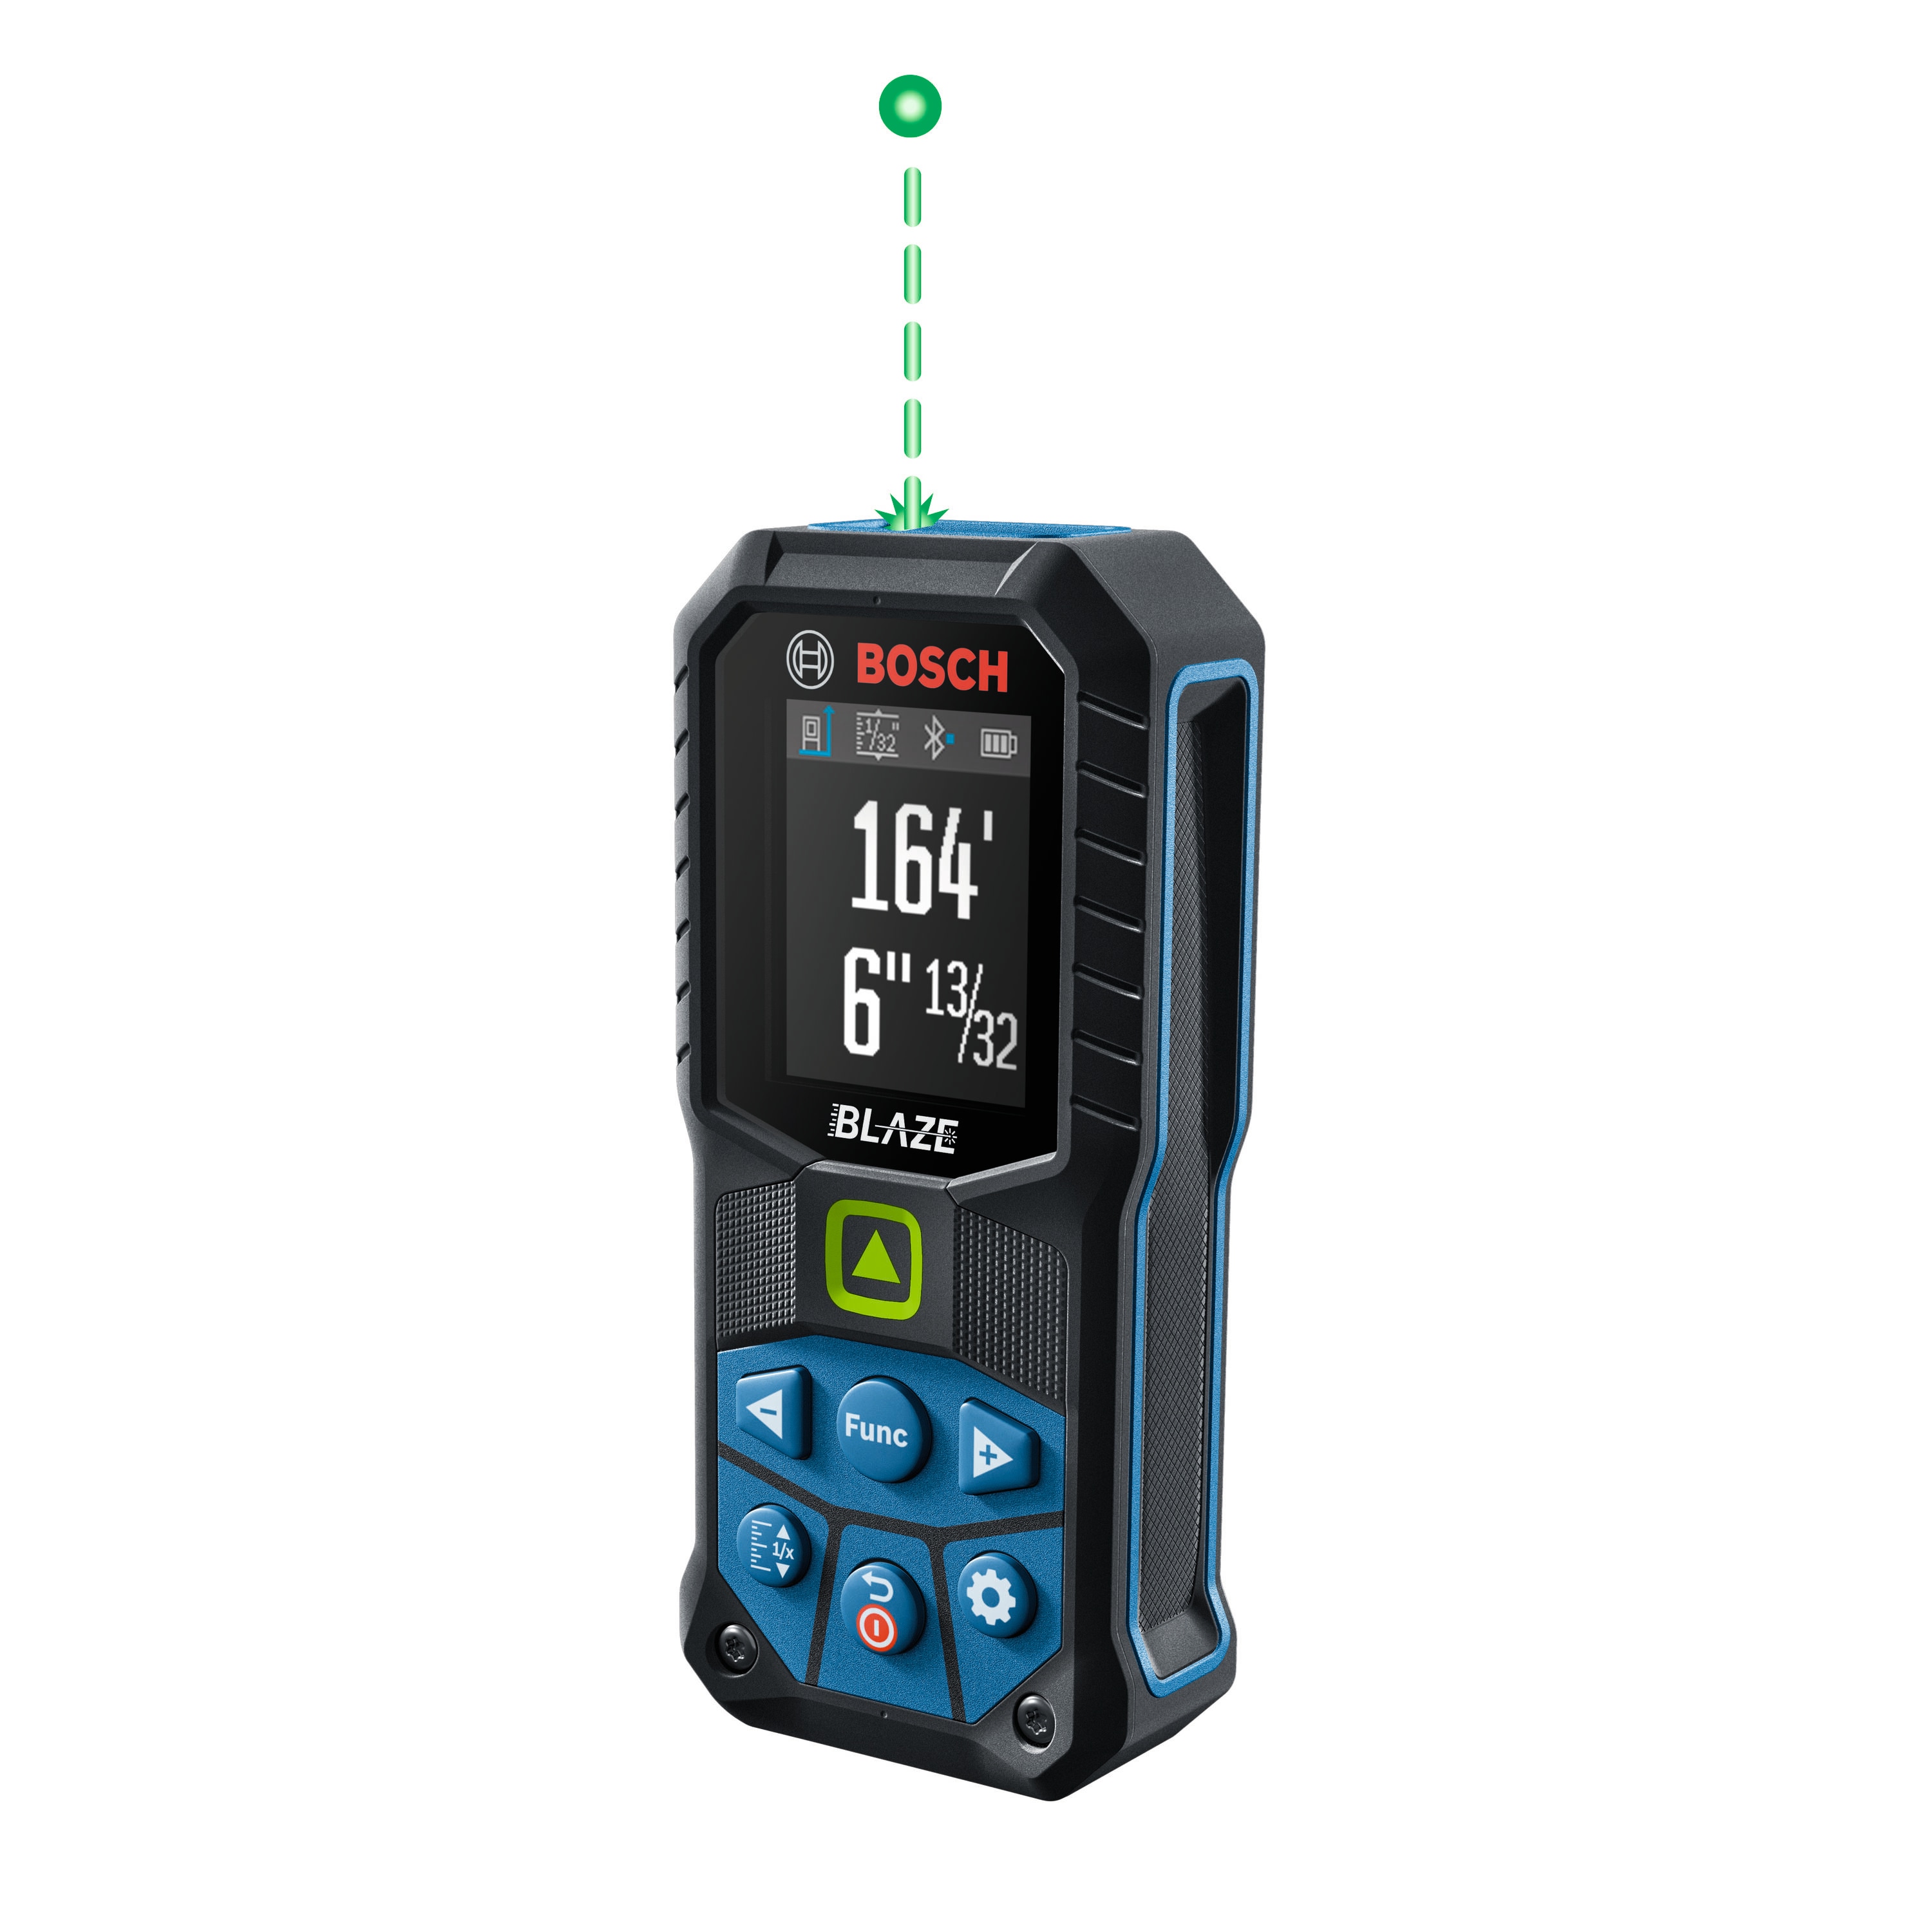  Leica DISTO D1 120ft Laser Distance Measure with Bluetooth 4.0,  Black/Red : Tools & Home Improvement